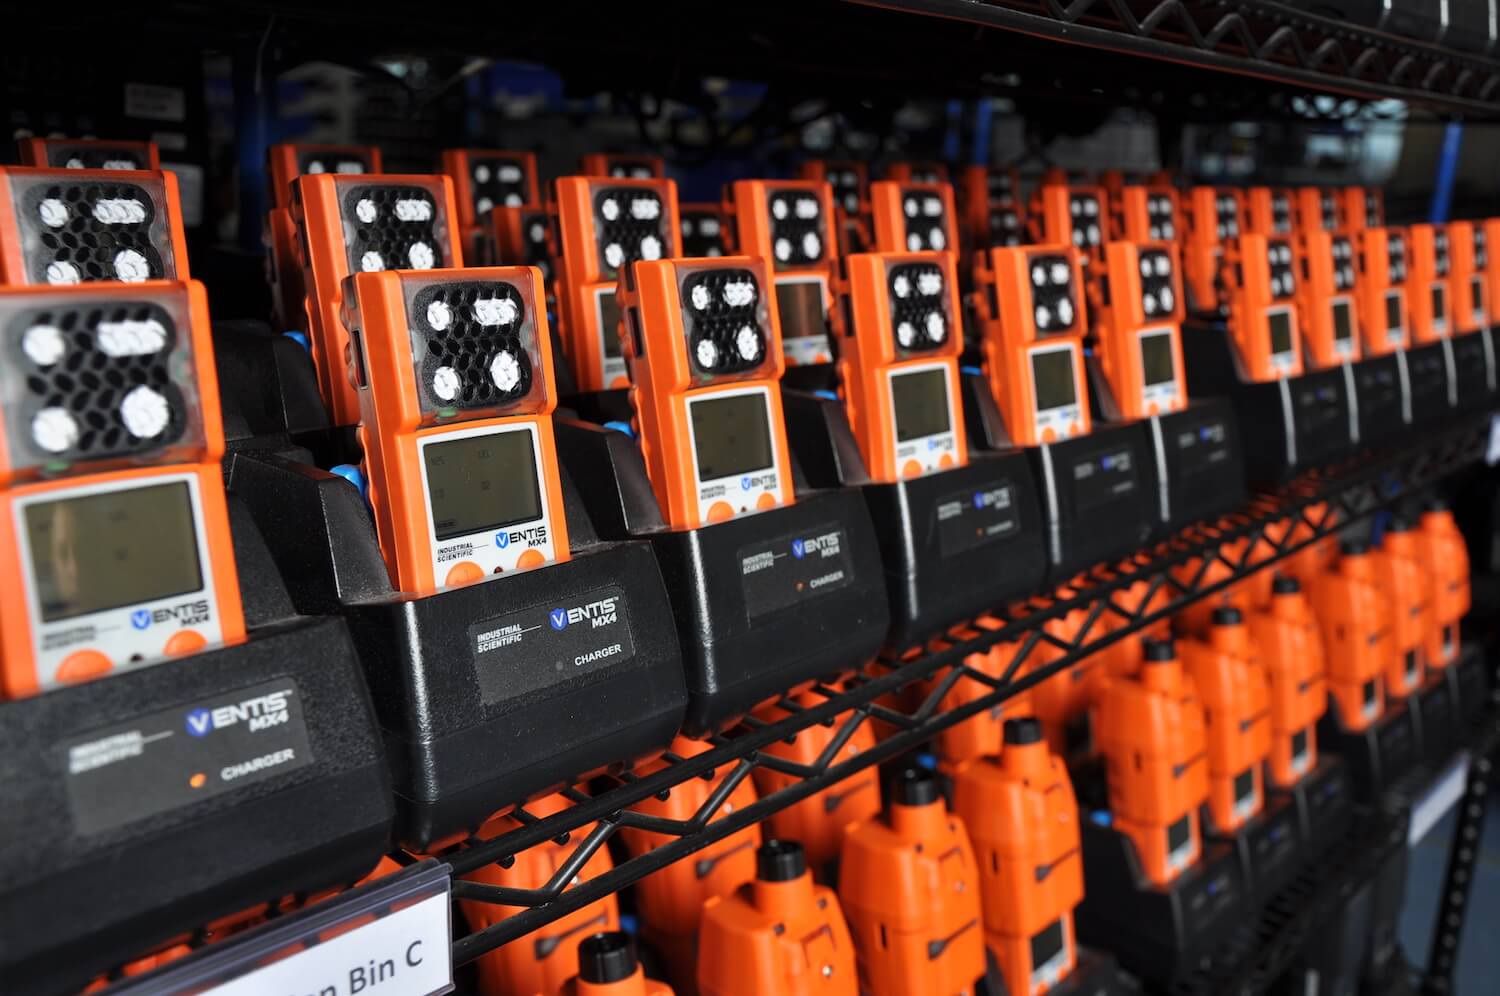 Shelves filled with multiple rows of personal gas monitors.